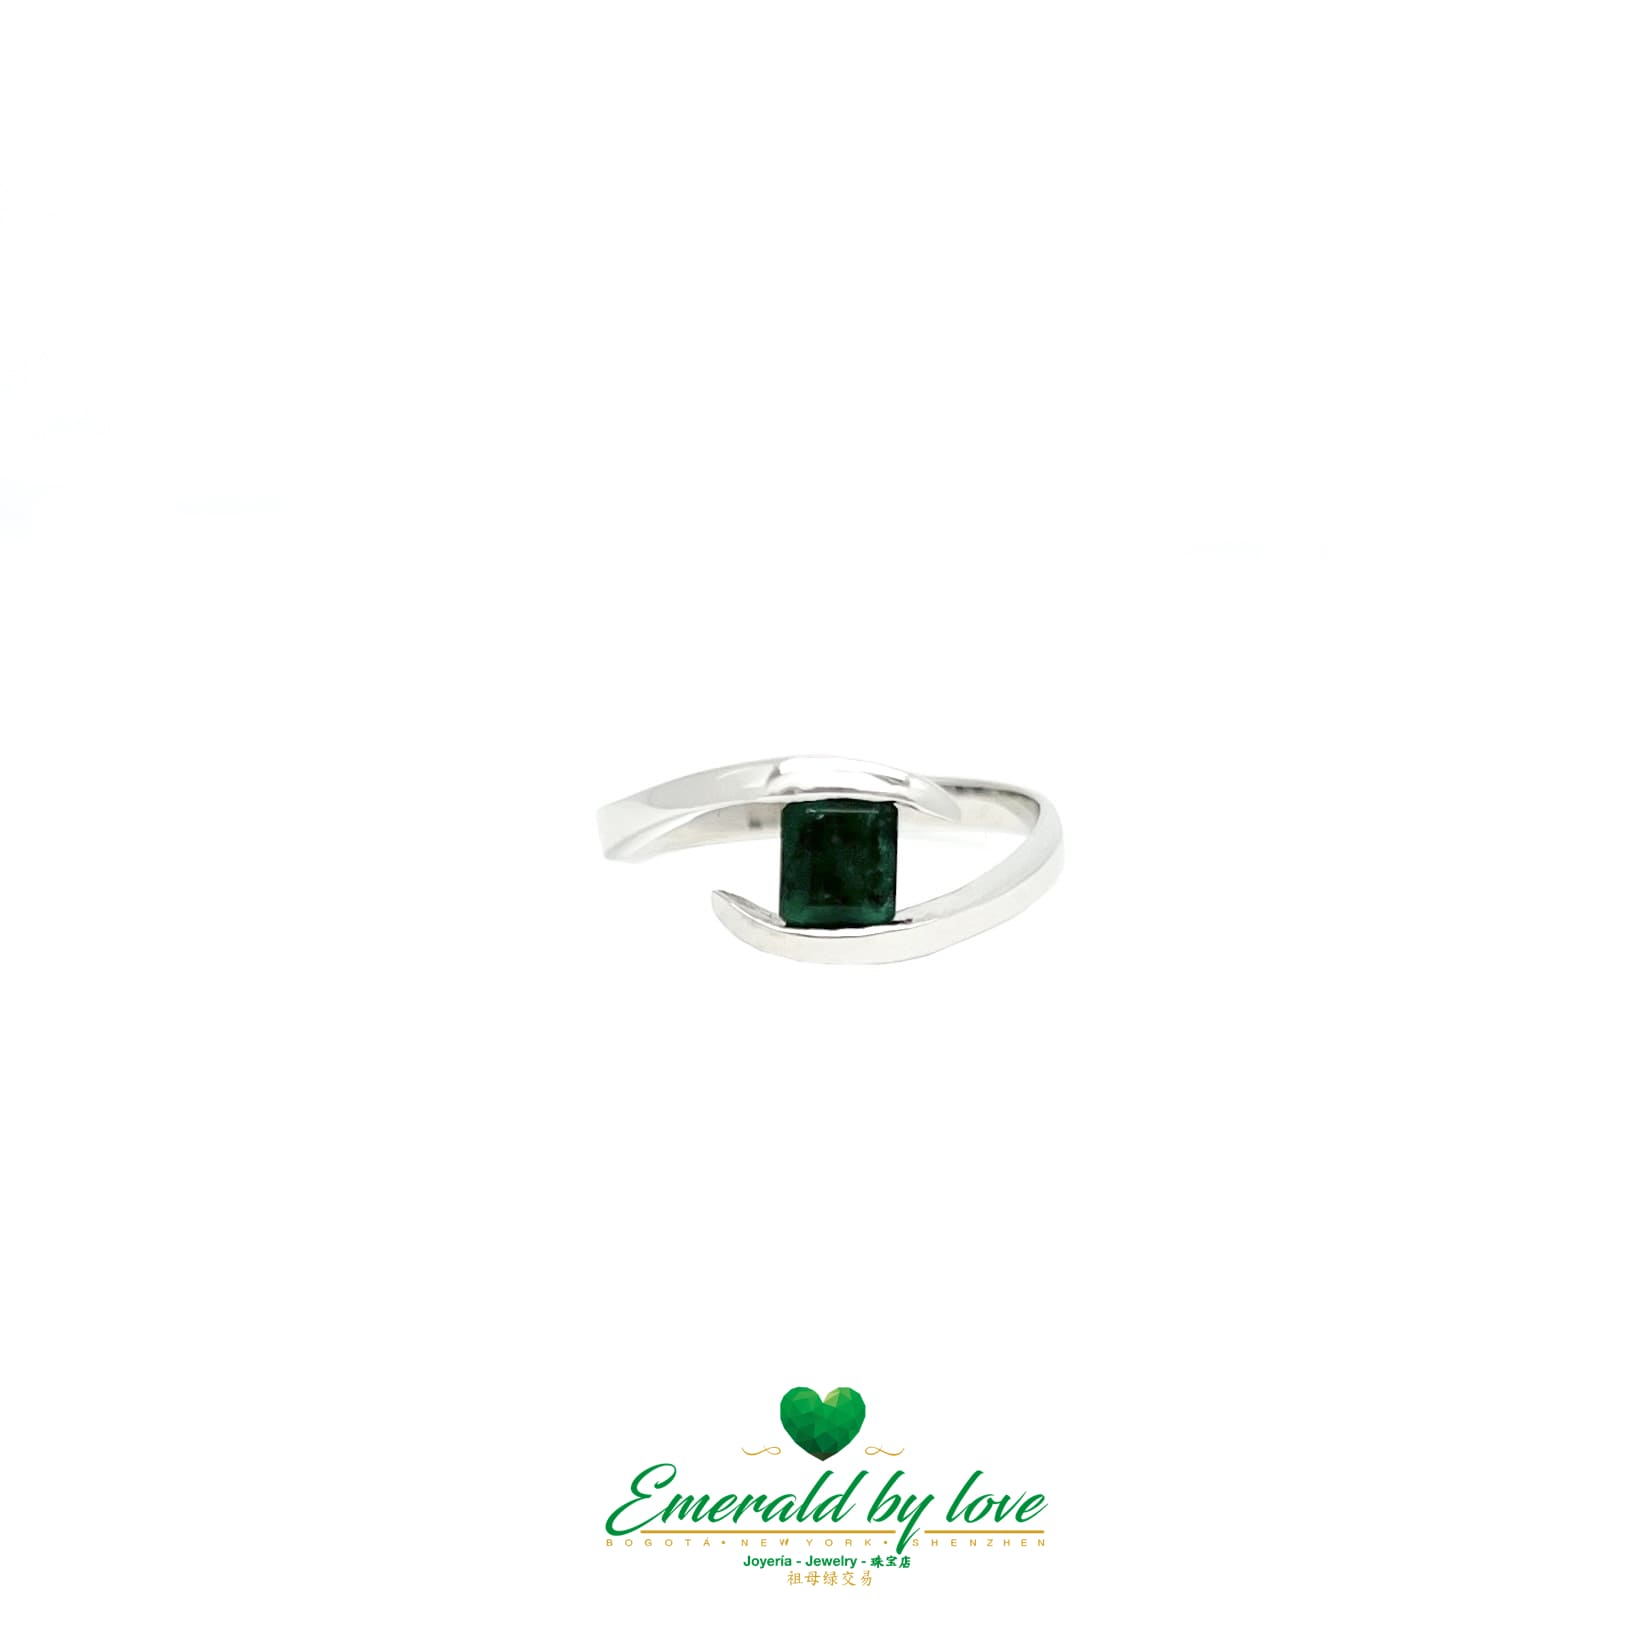 Sleek White Gold Ring with Diagonal Band and Square-Cut Emerald